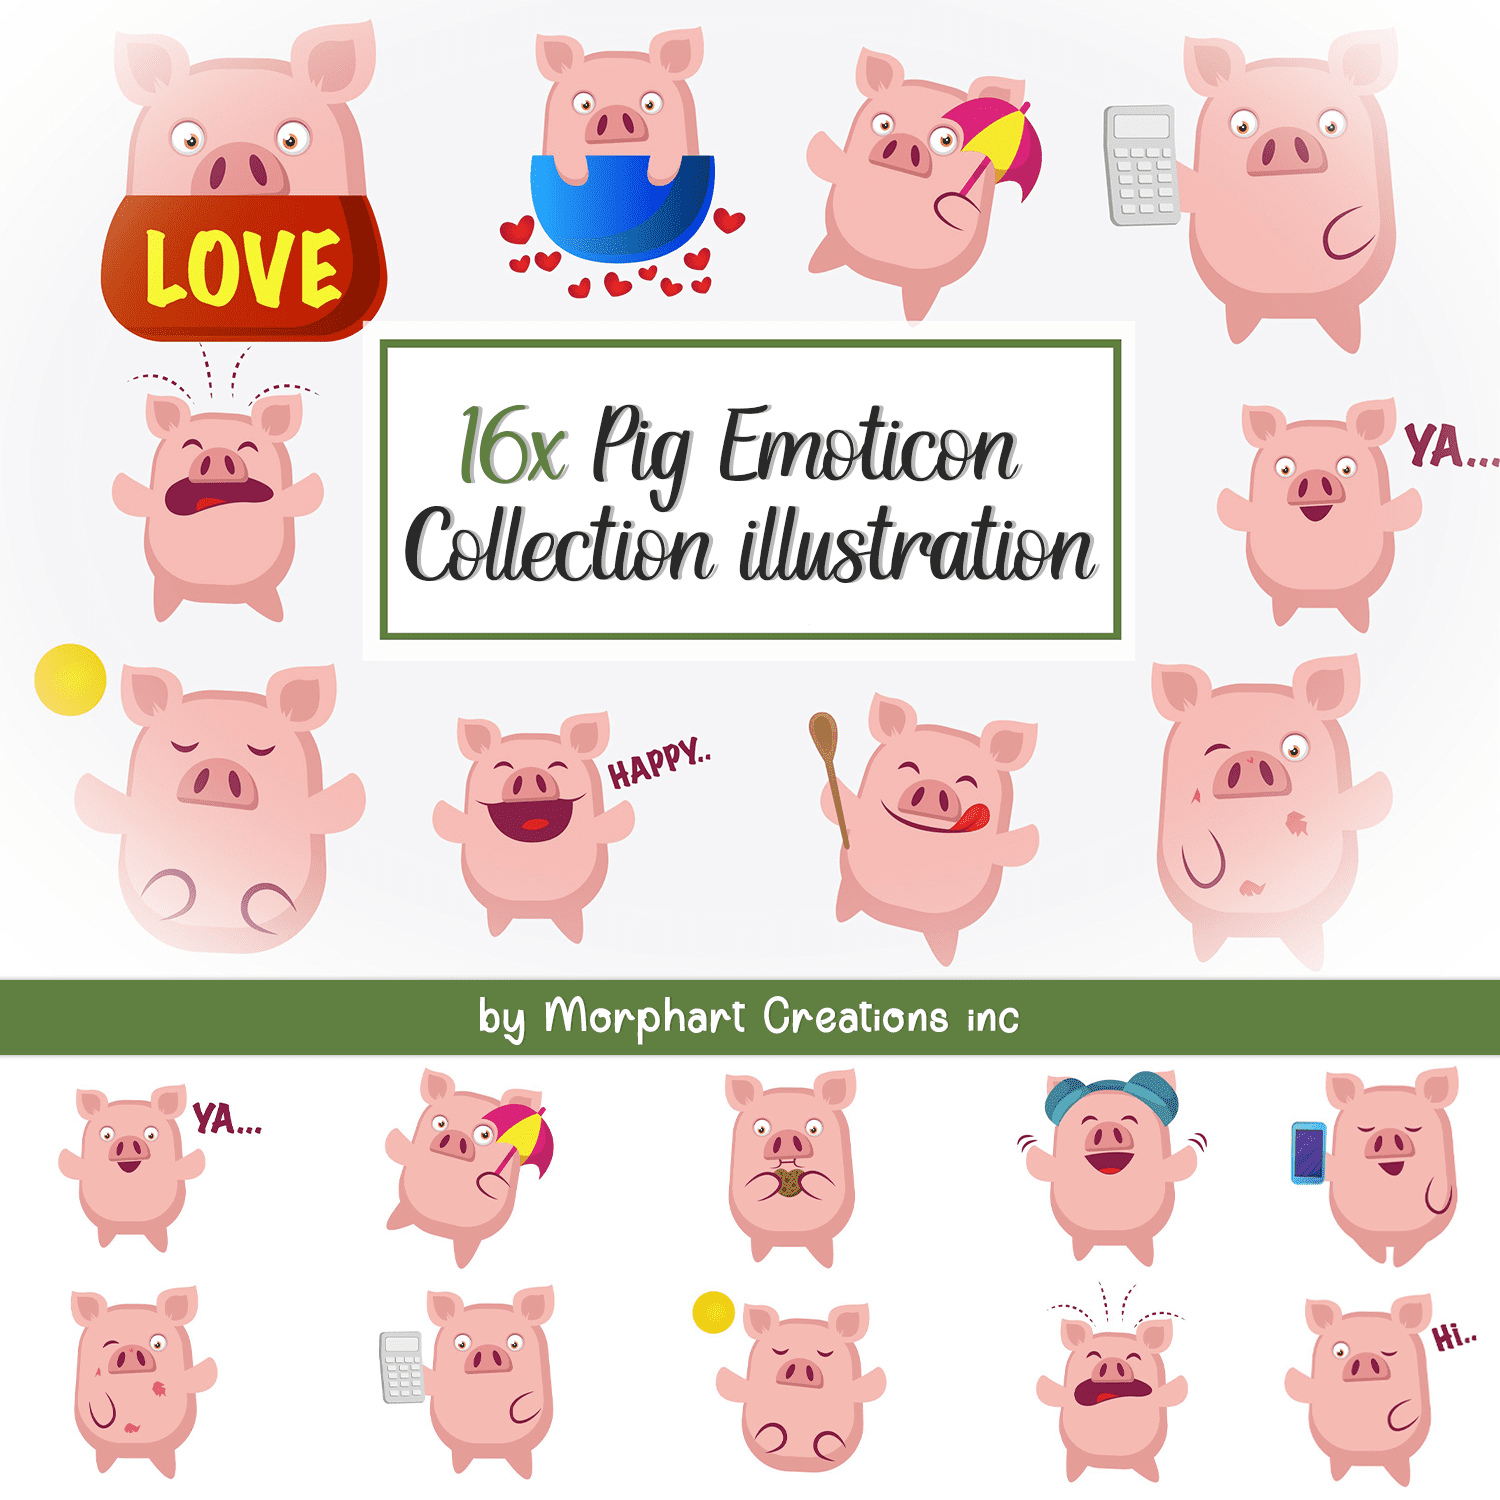 A set of adorable images of pigs emoticons.